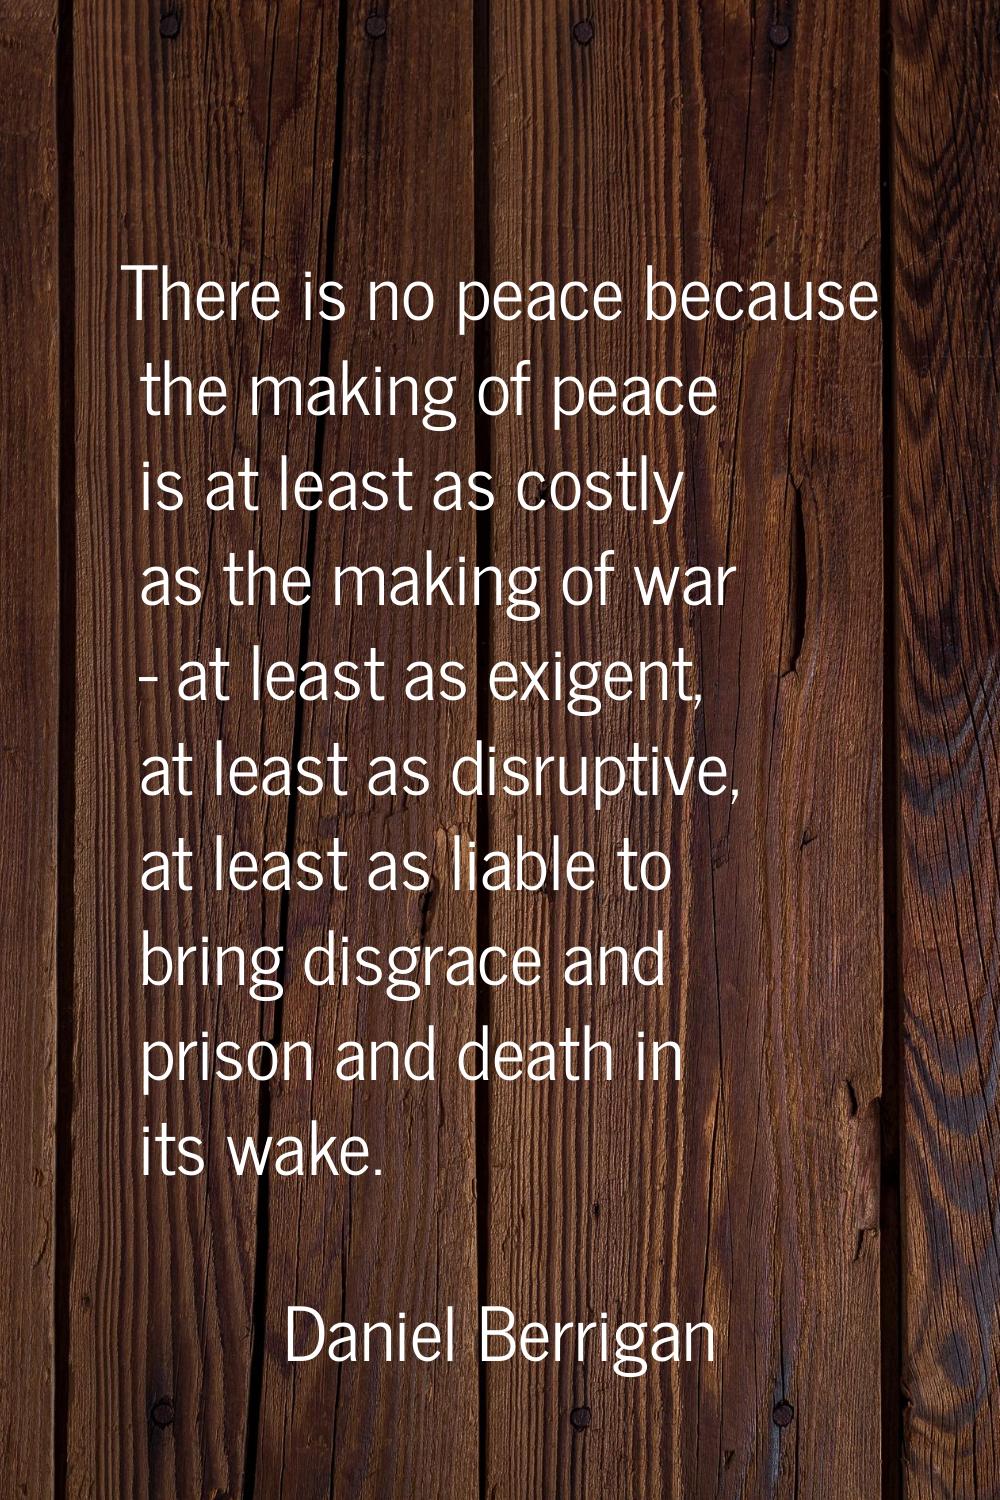 There is no peace because the making of peace is at least as costly as the making of war - at least